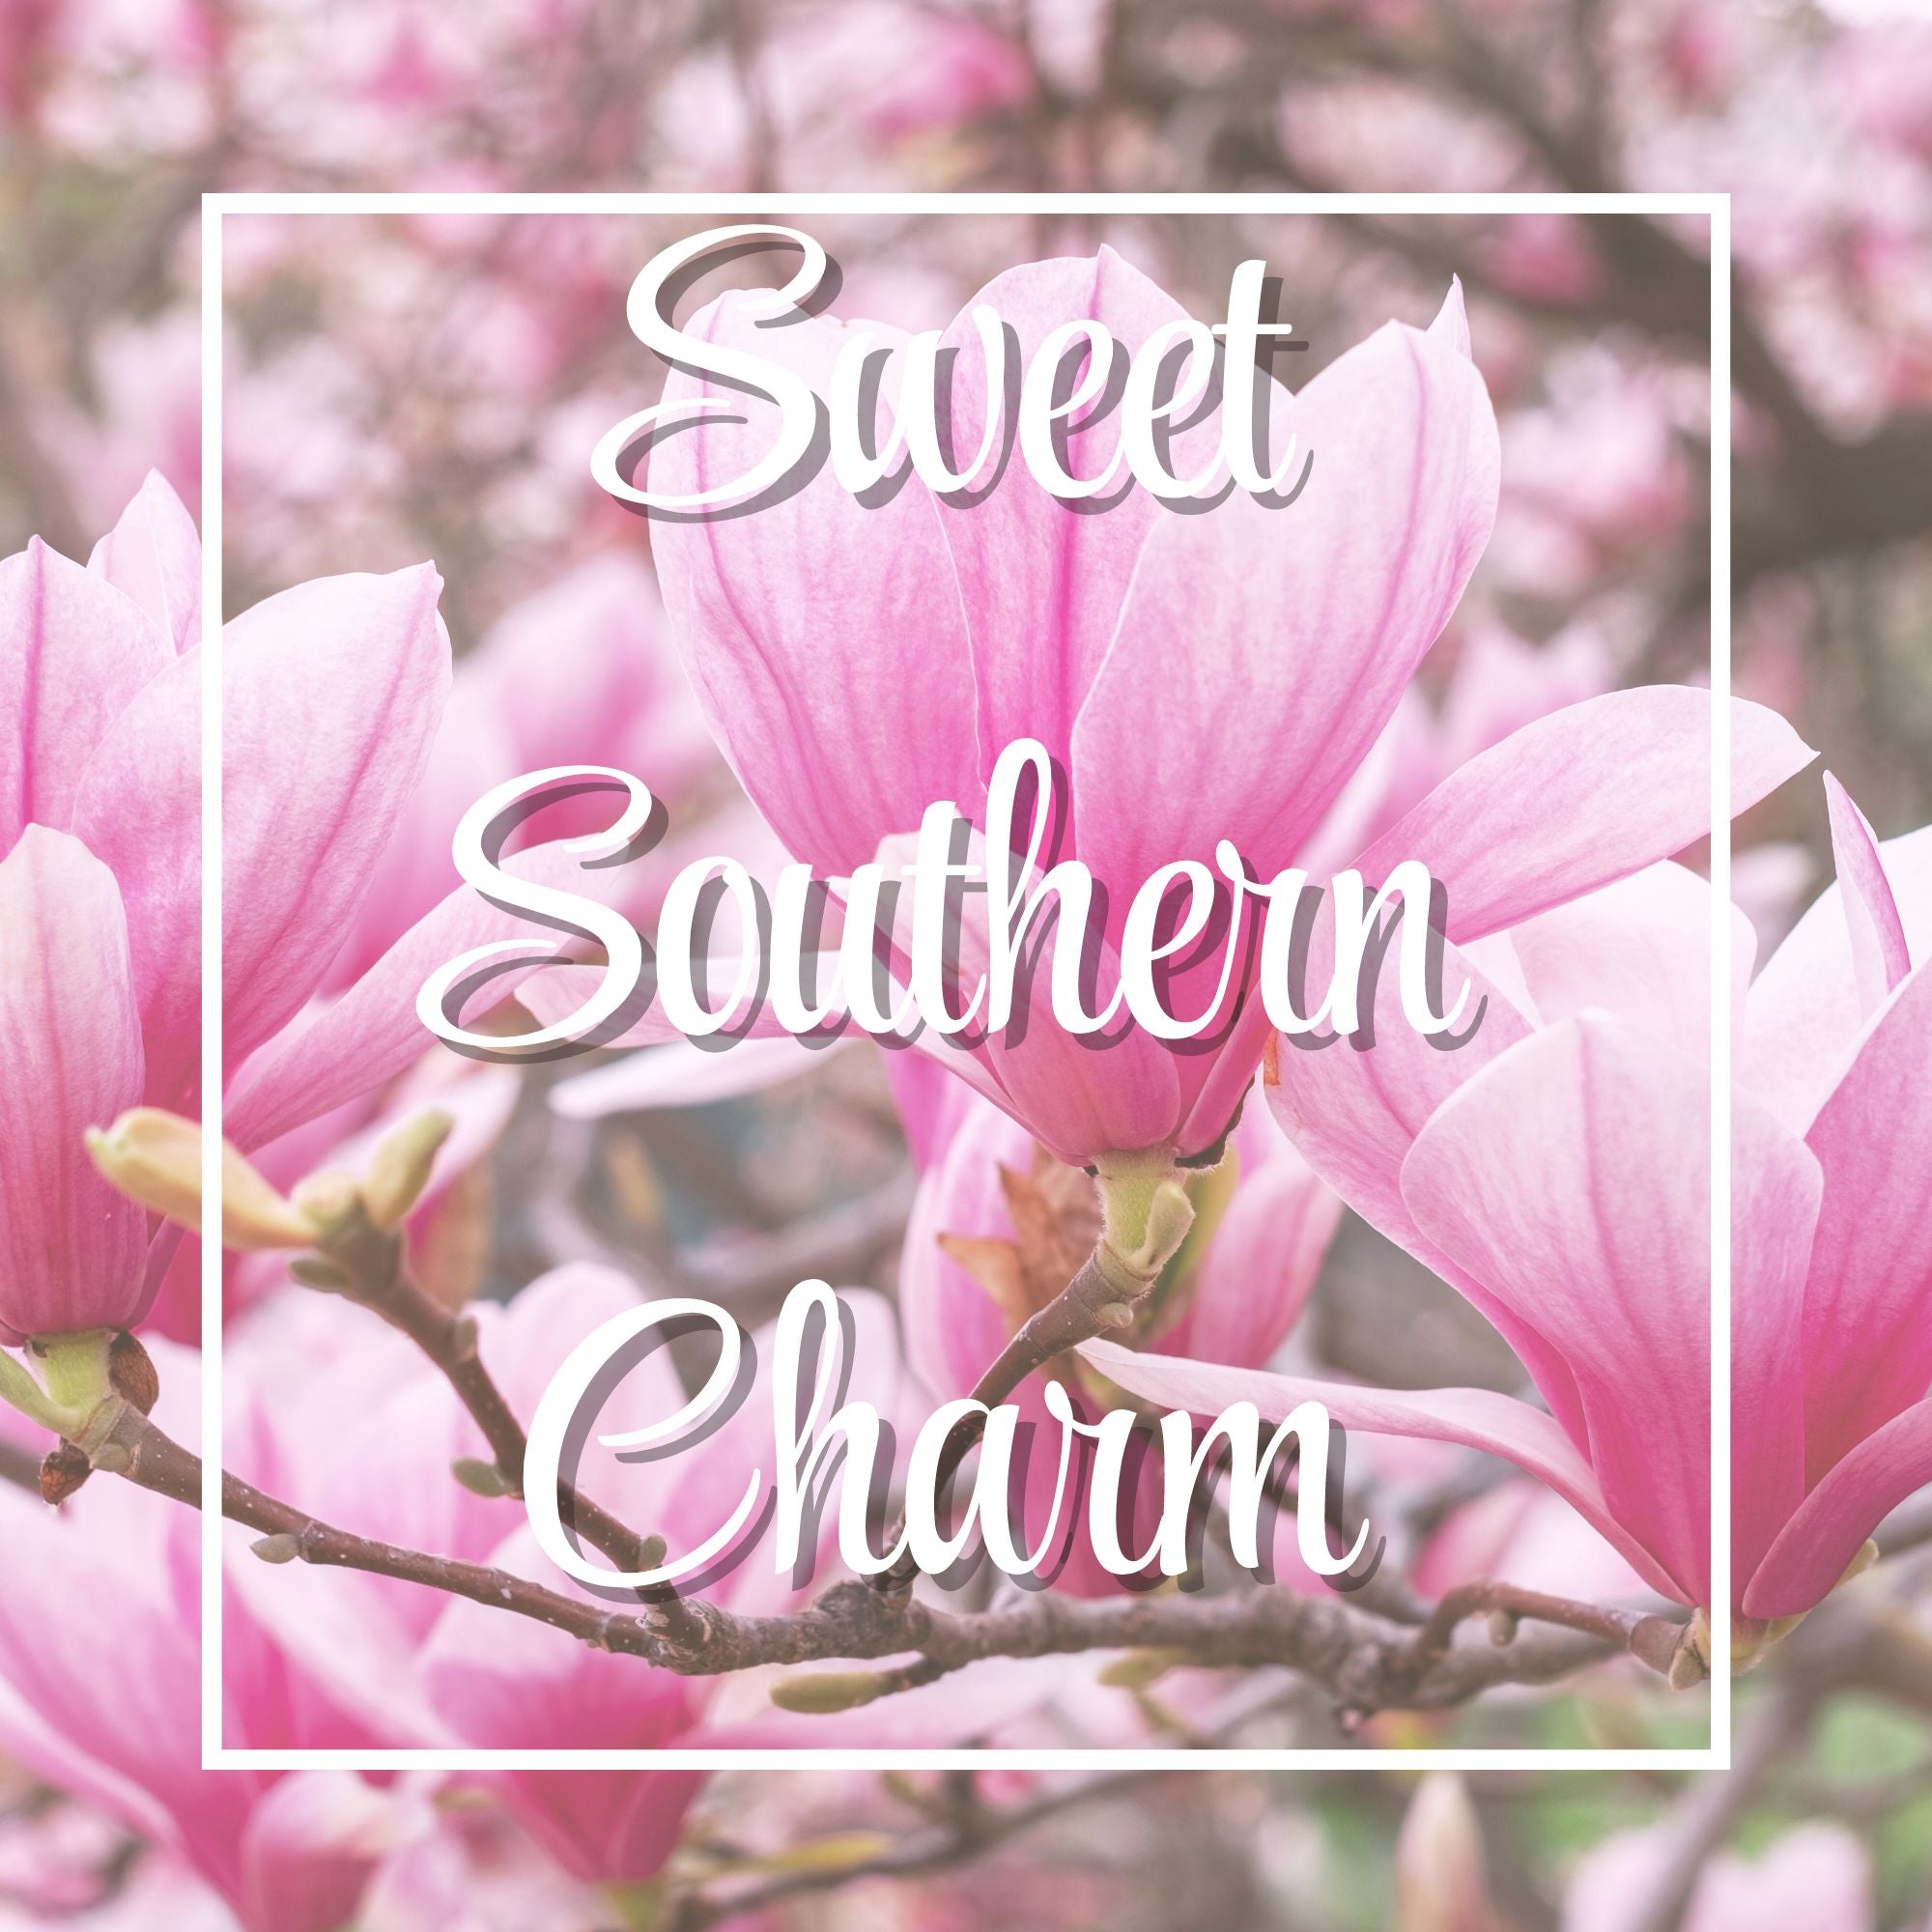 Sweet Southern Charm | The Columbia Fragrance Co.